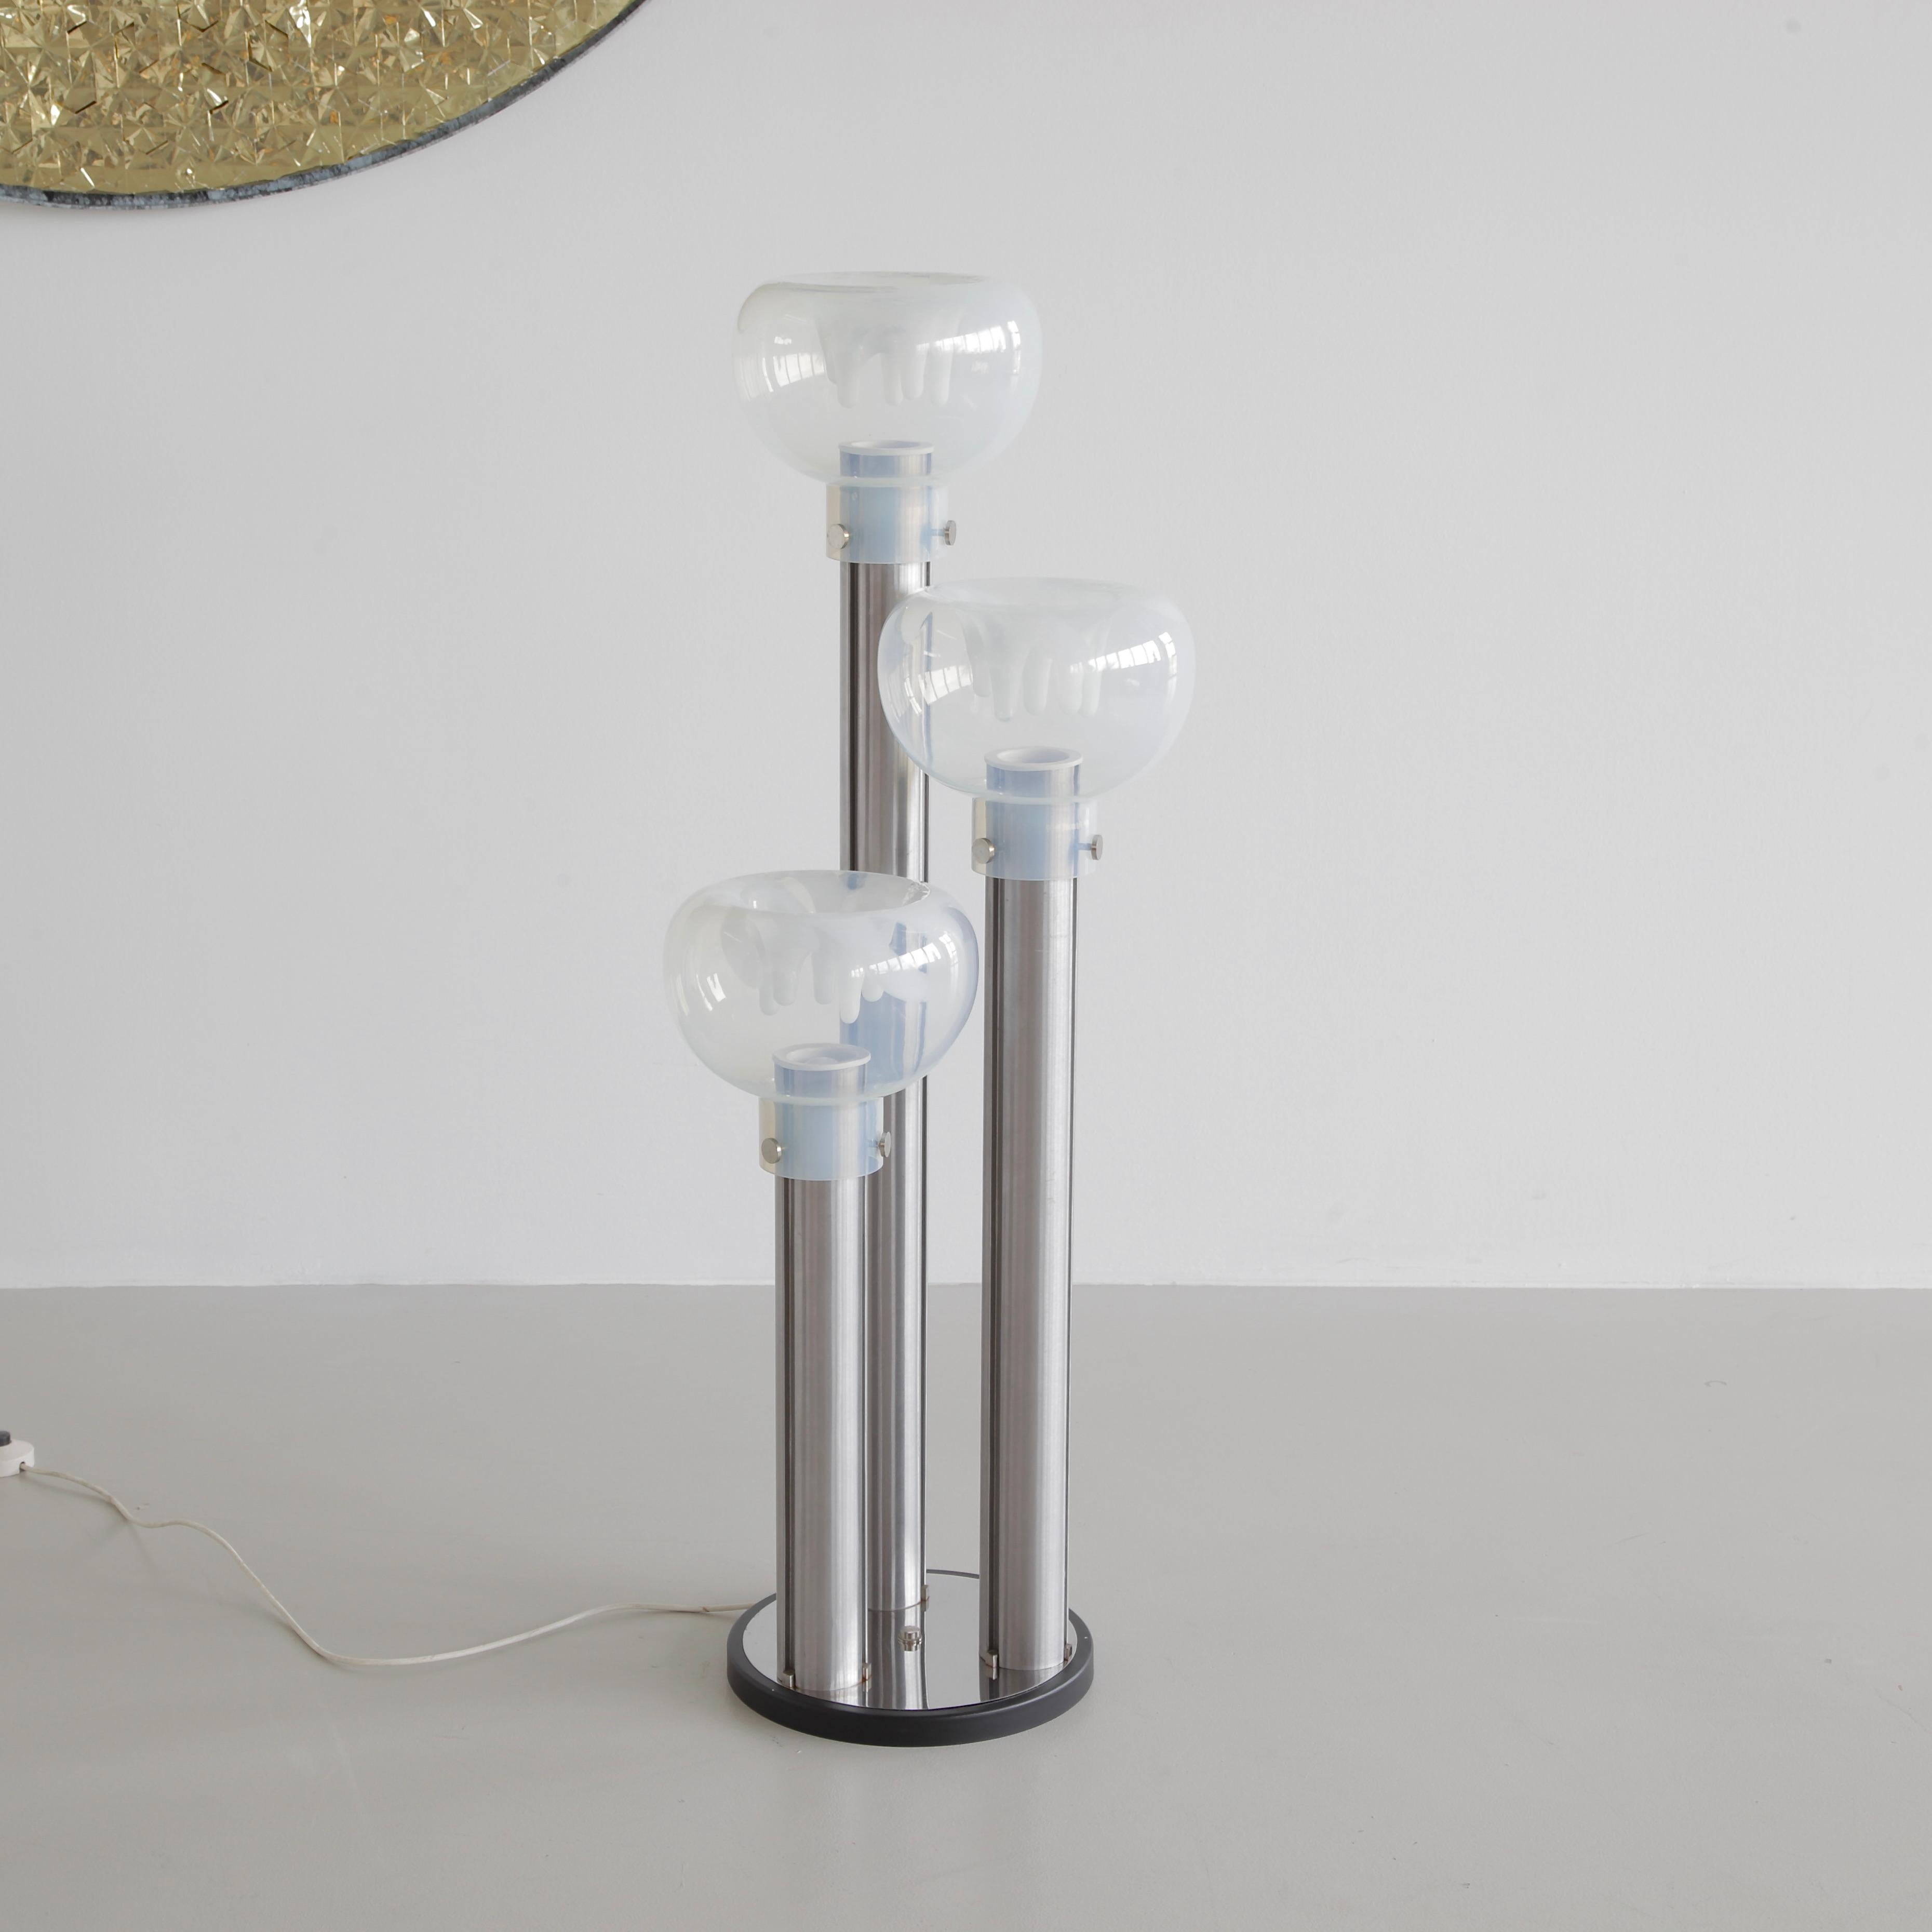 Floor lamp designed by Tony Zuccheri, Italy, VeArt, 1970s.

Standard lamp with three hand-moulded glass lampshades, organic clear and white structure. Metal base with three metal legs supporting the lampshades. Glass made in Murano.